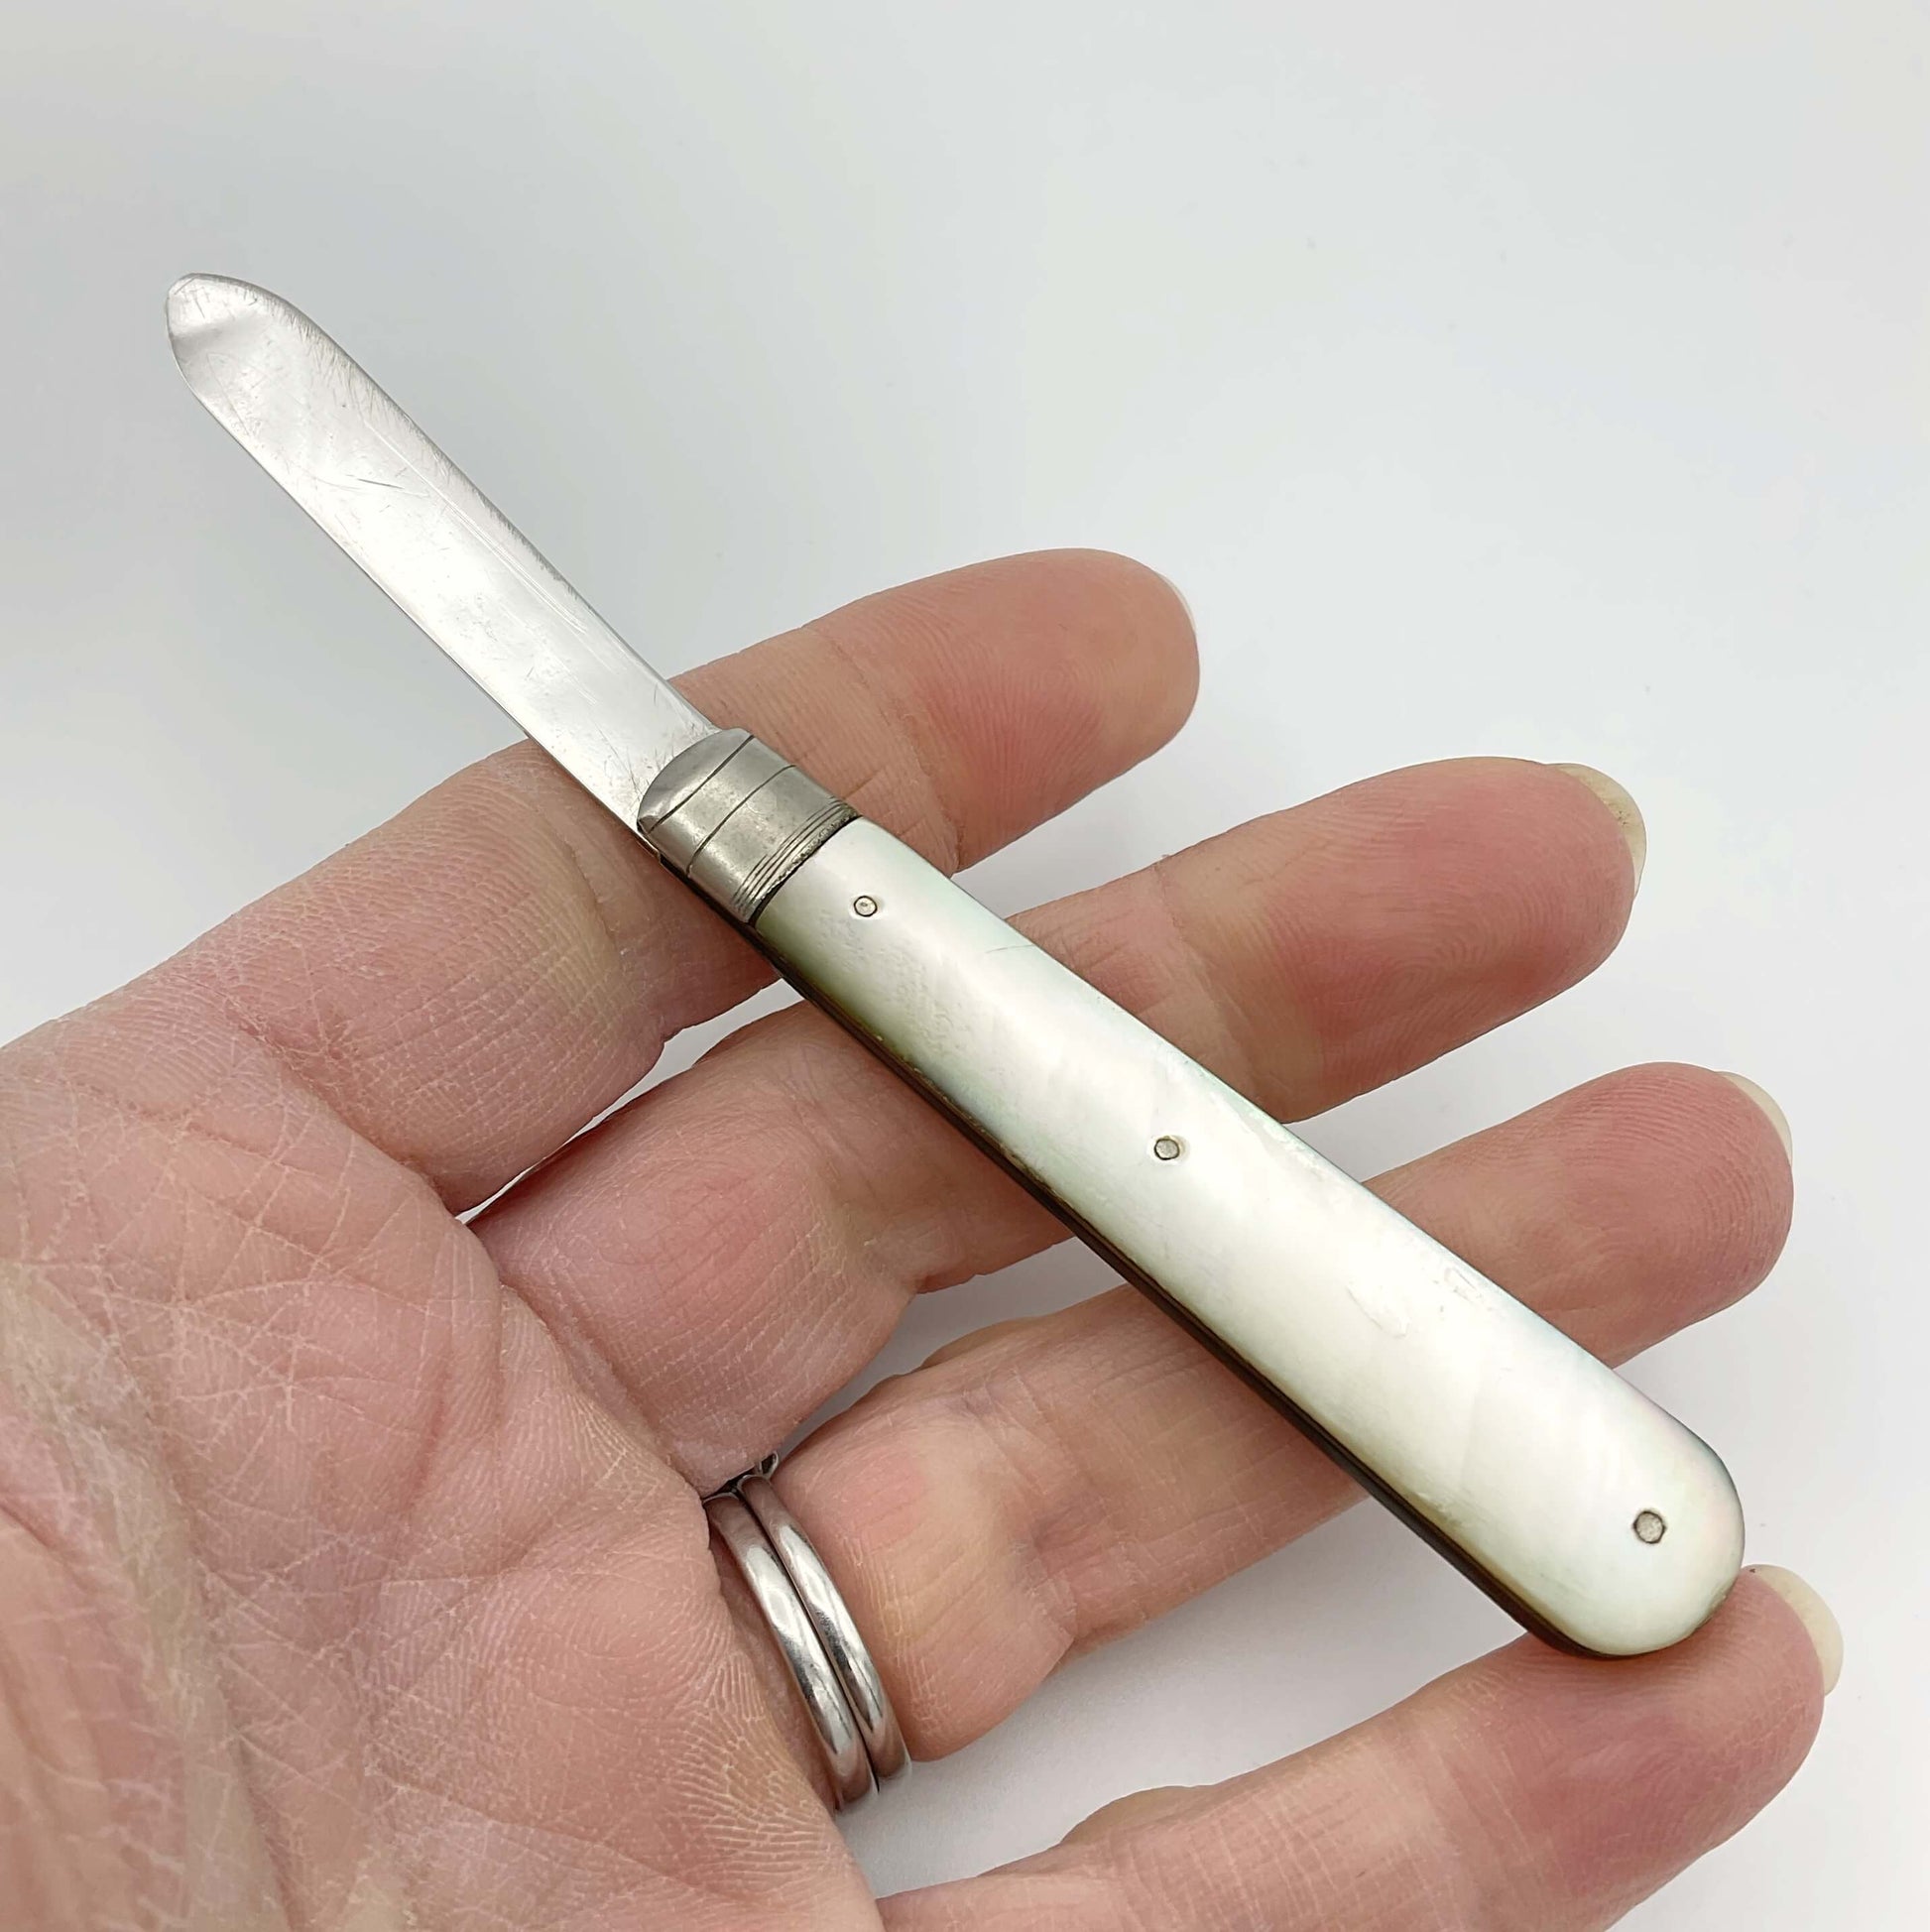 This is s folding fruit knife with a silver blade and a mother of pearl handle held in a hand.